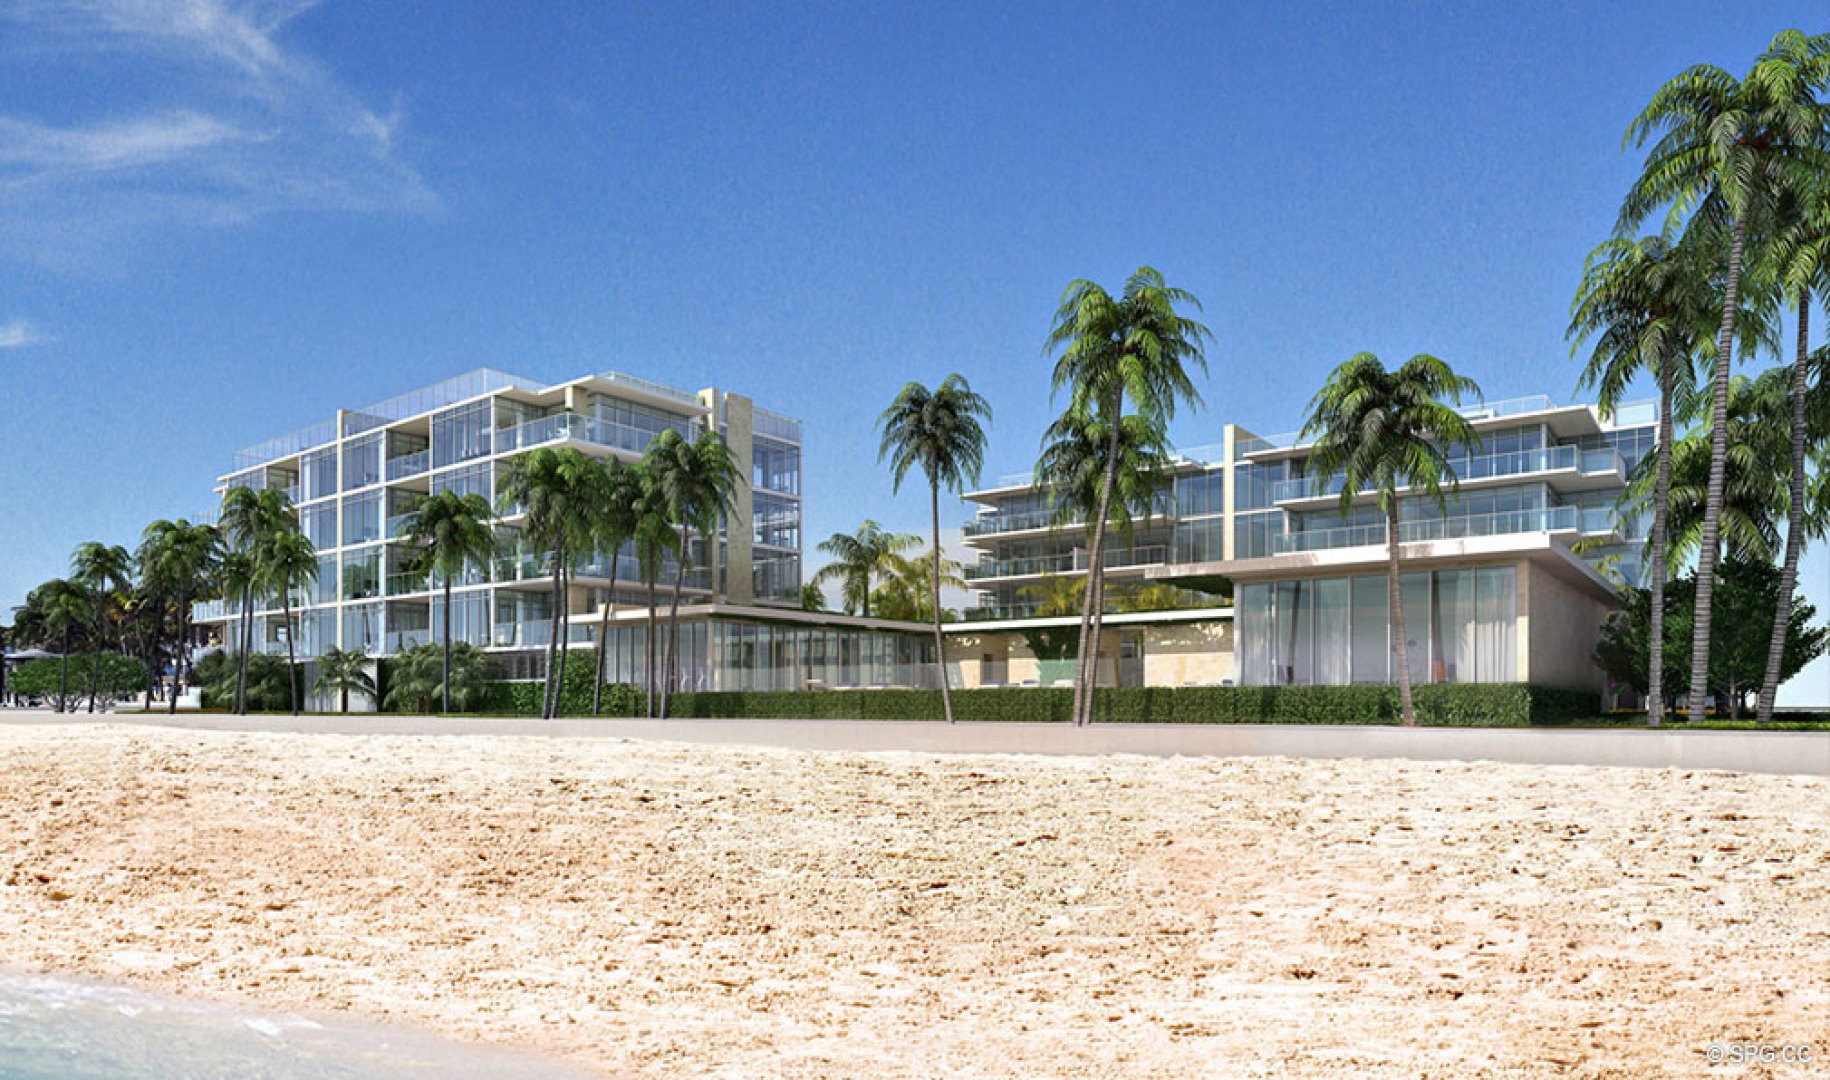 View from the Sand of Sage Beach, Luxury Oceanfront Condos in Hollywood Beach Florida 33019